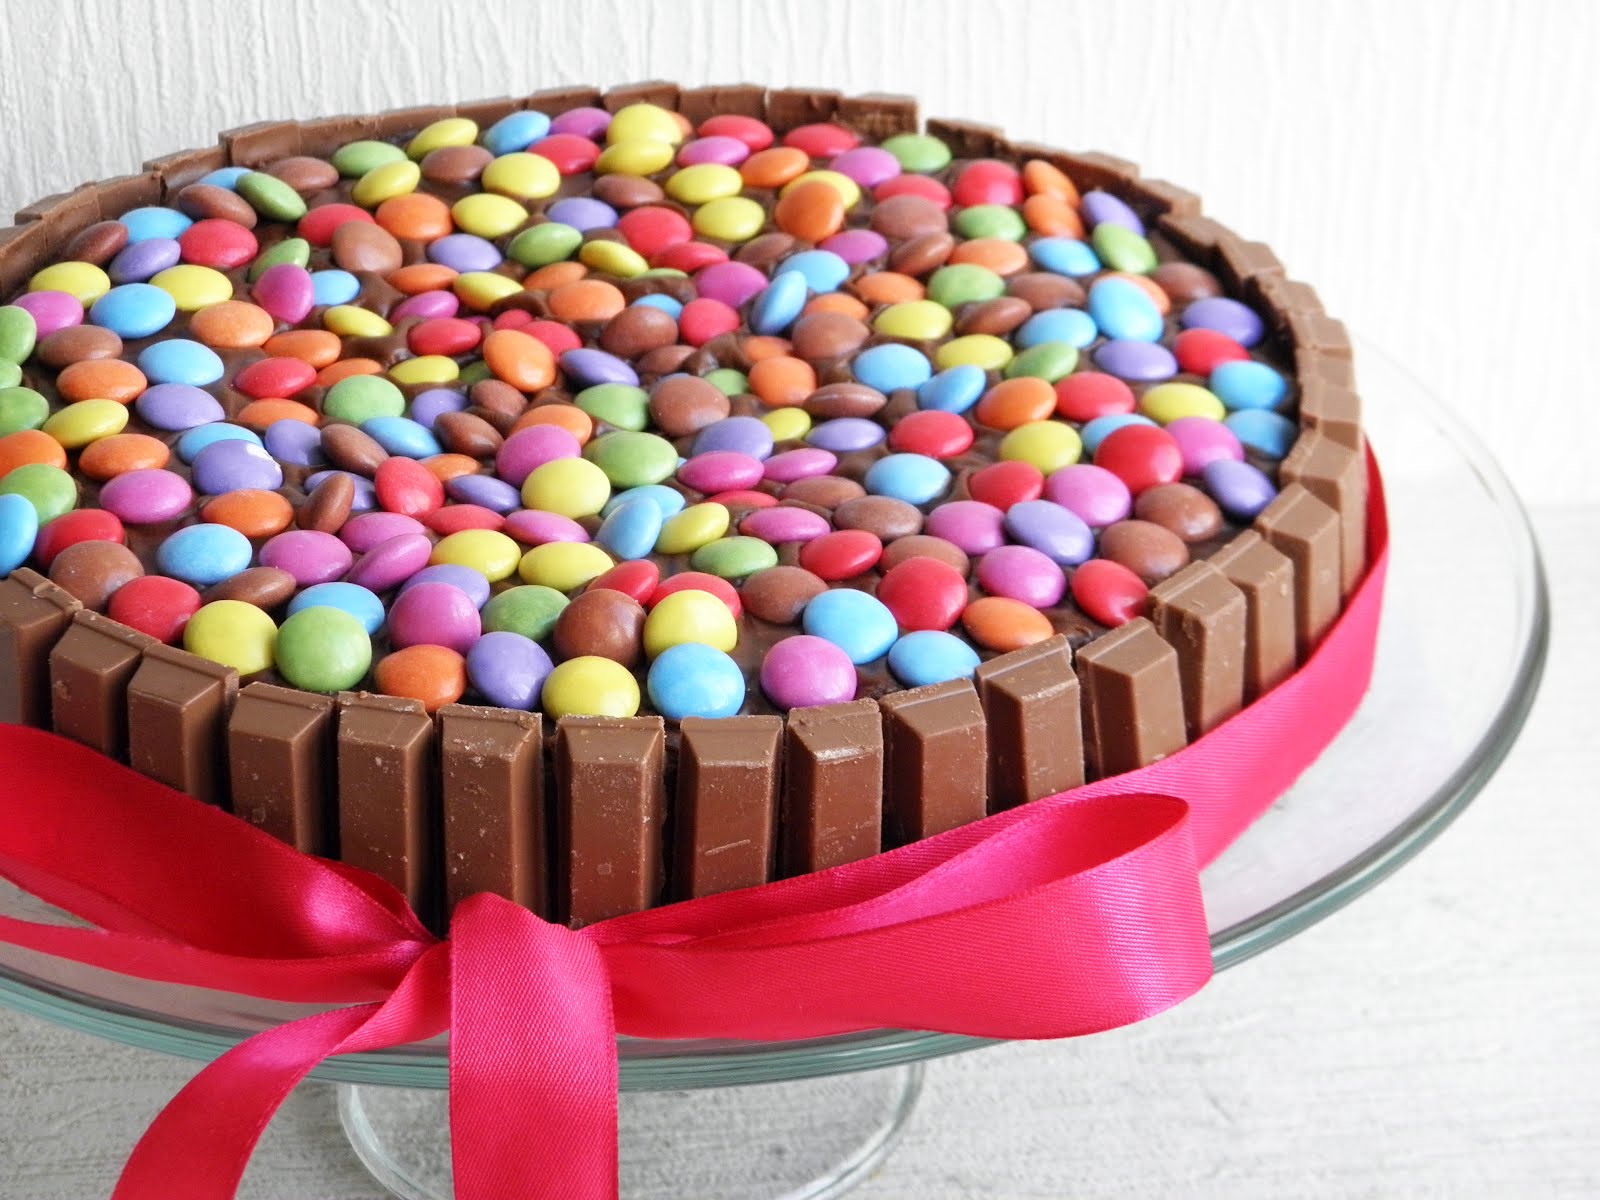 Easy Recipes for Making a Kitkat Cake at Home